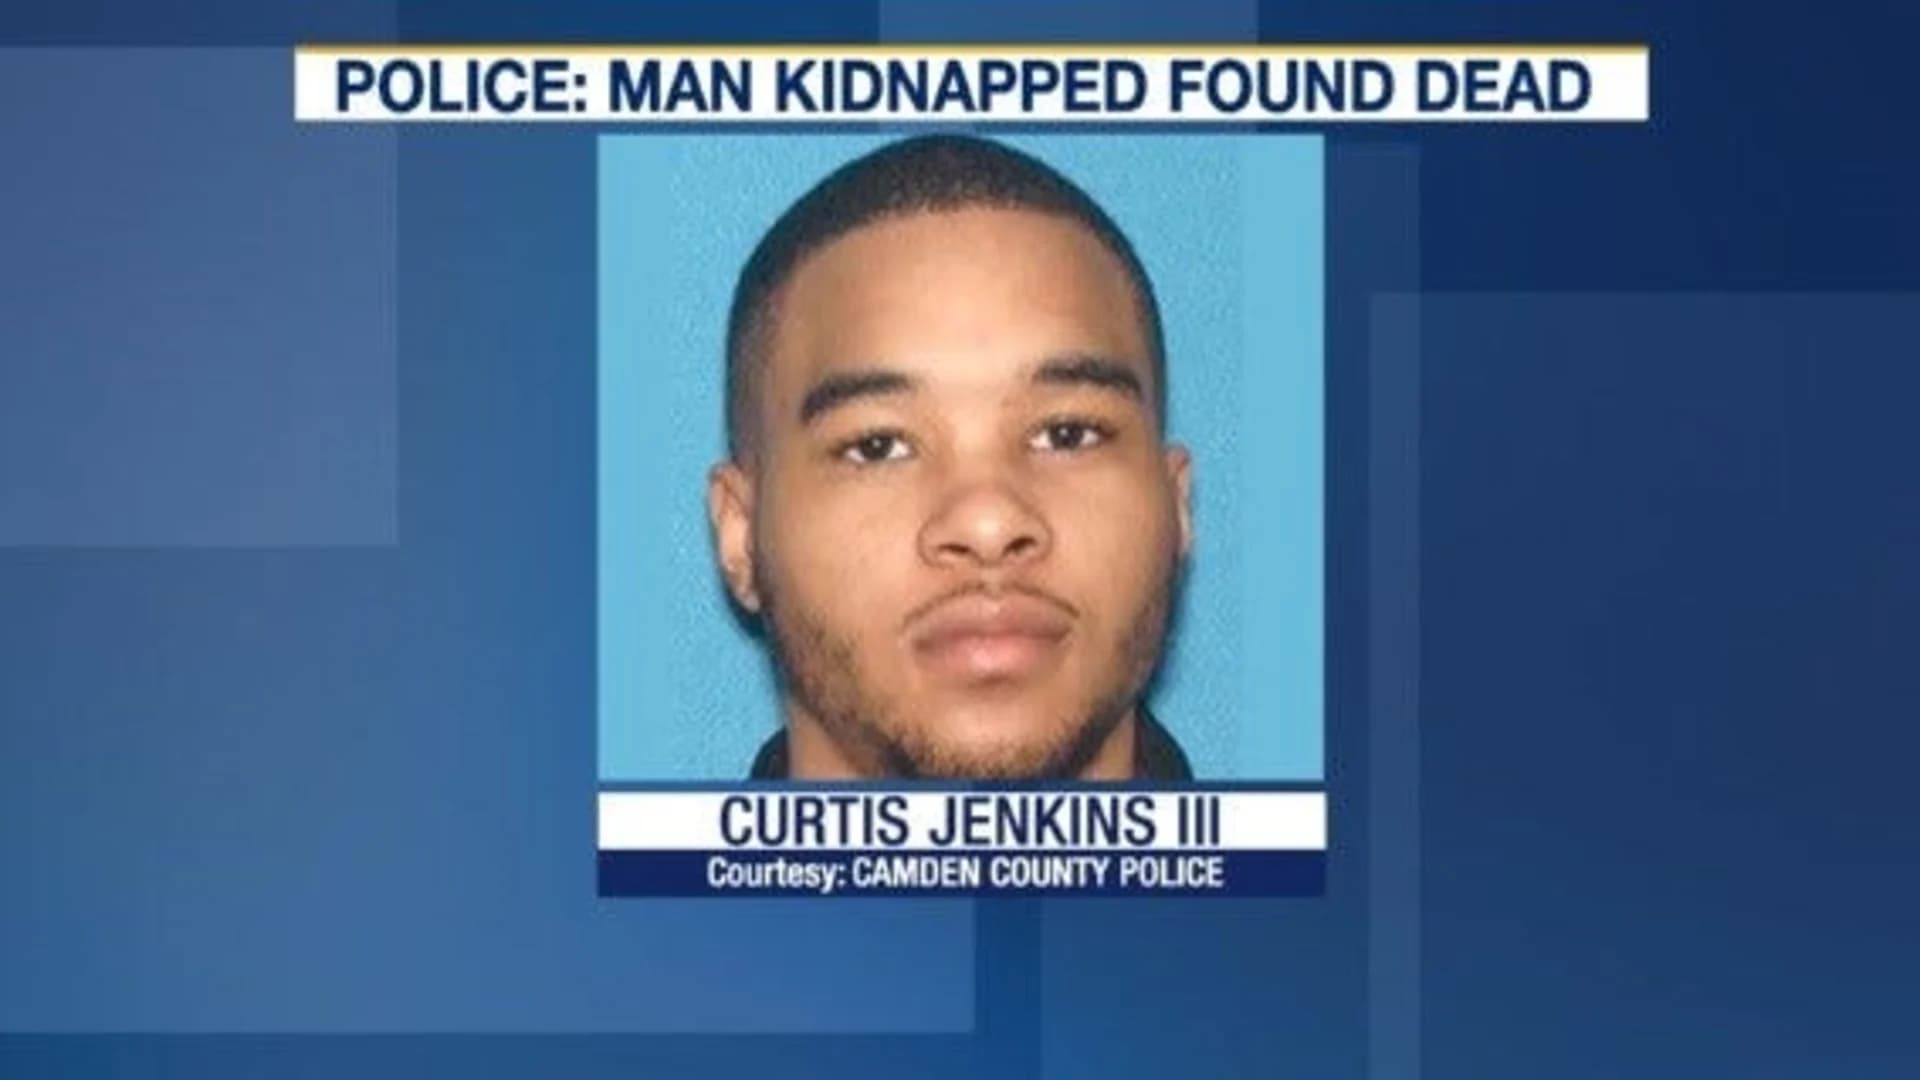 Councilman's grandson found dead after kidnappers demanded drugs